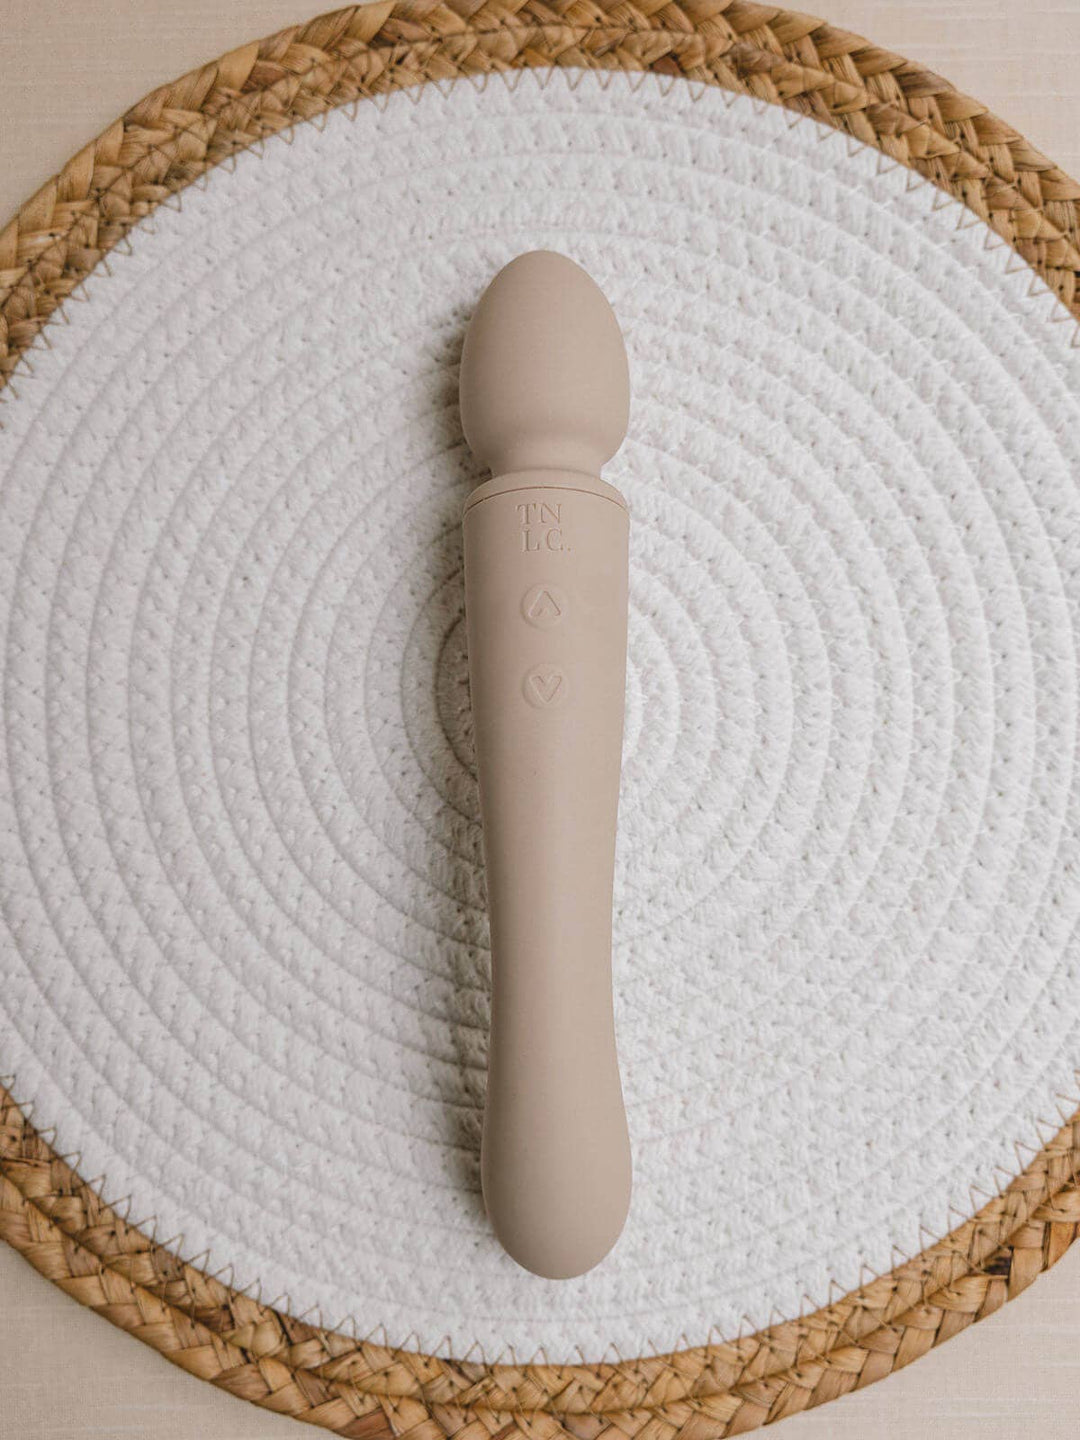 The Natural Love Company - Cassia | Dual-ended and Curved Wand Vibrator | Ocean Plastic: Retail Box